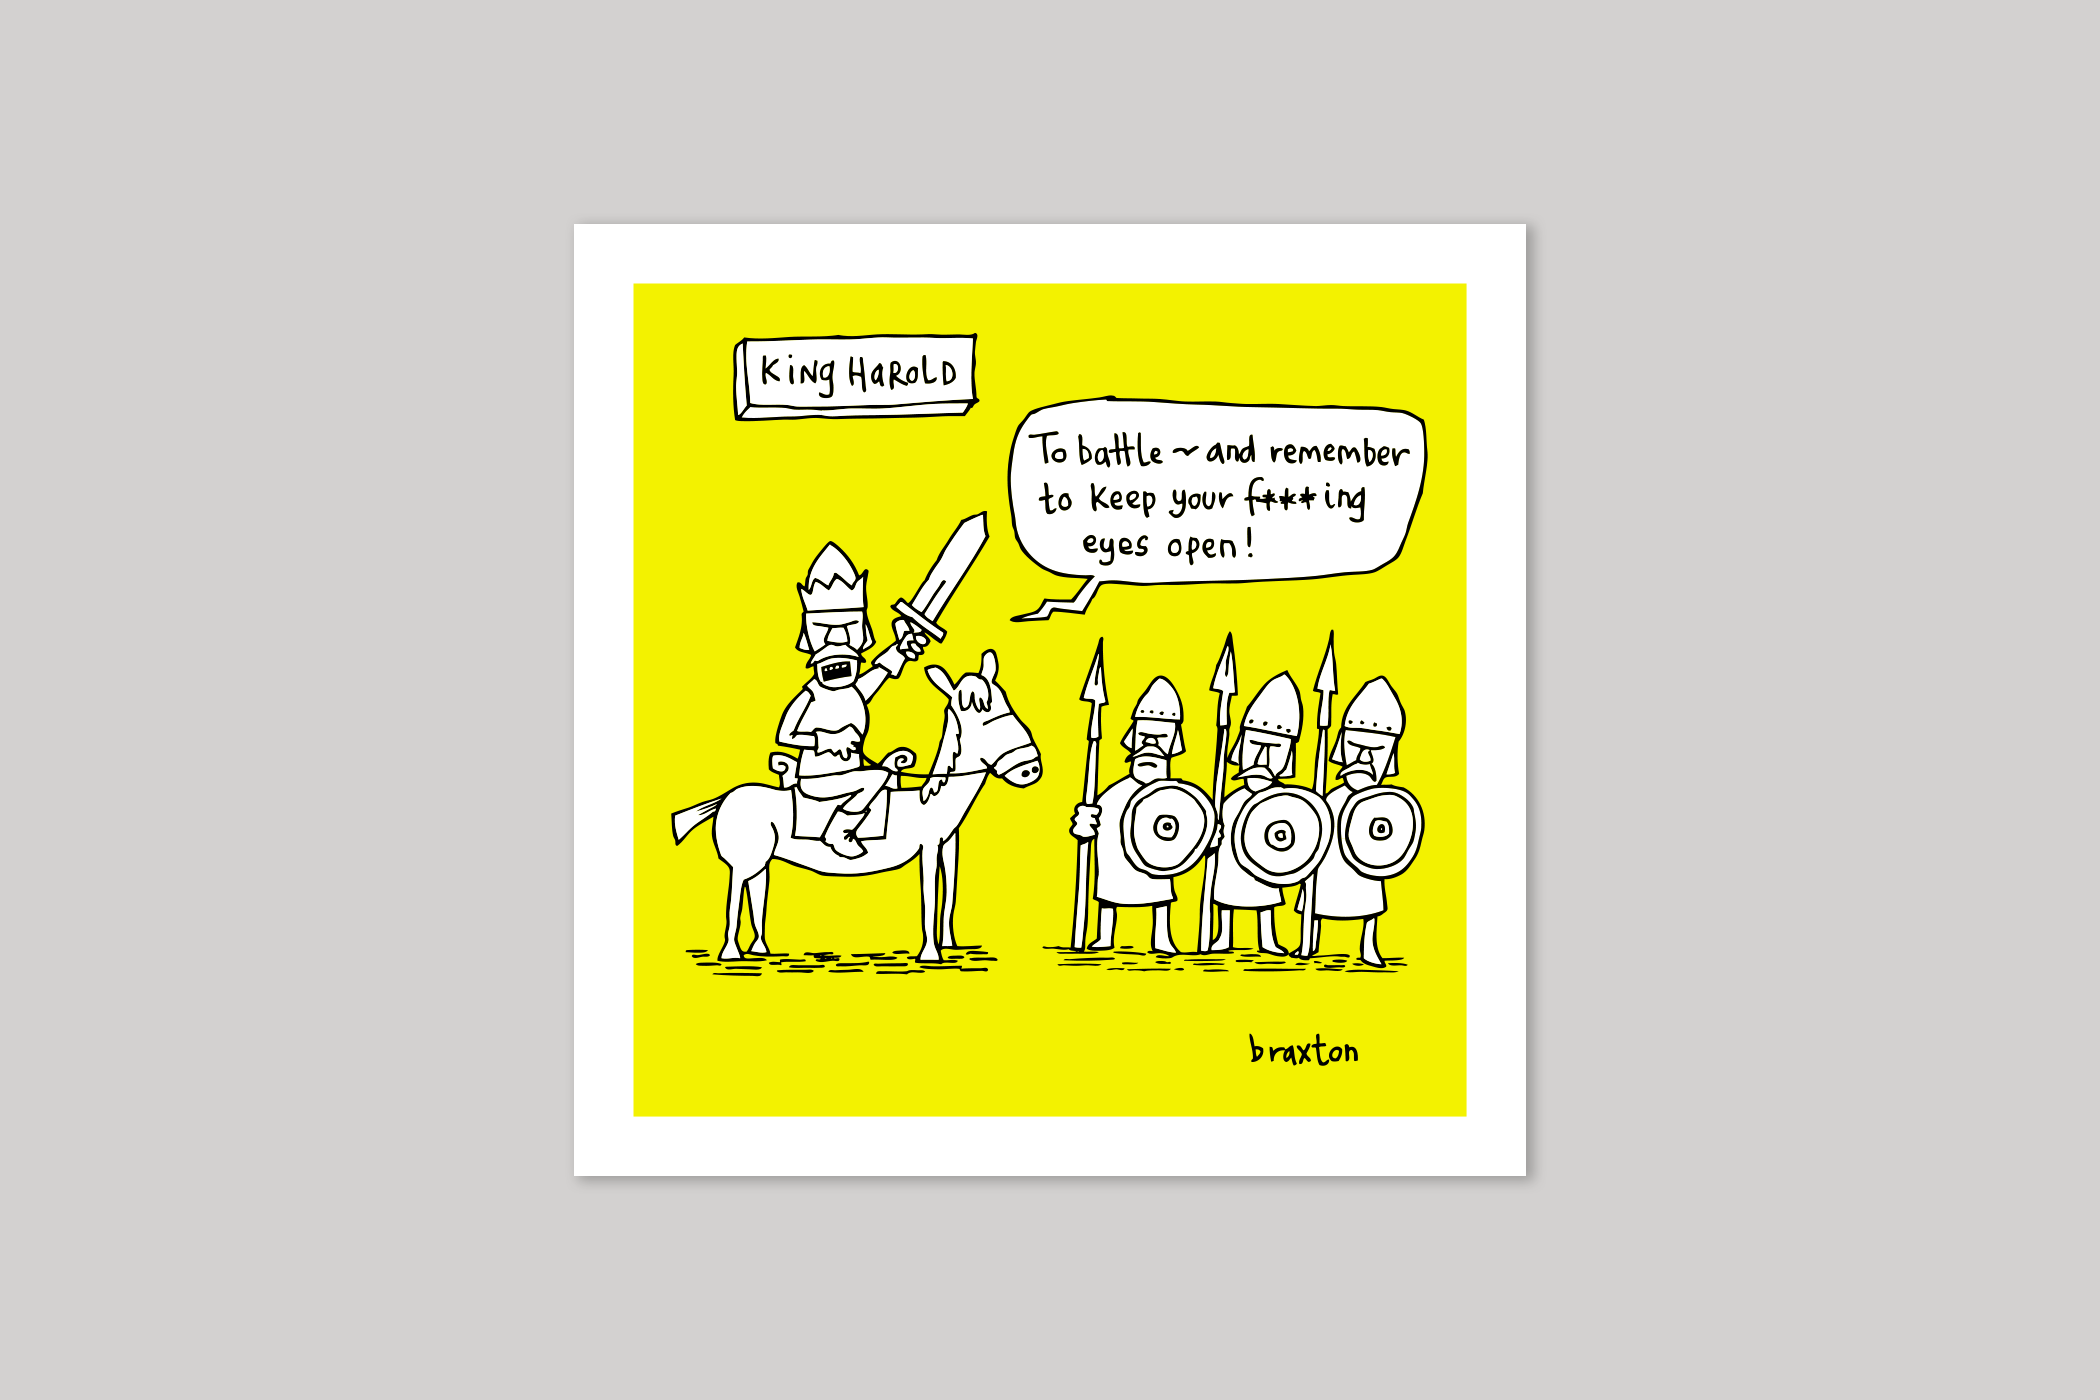 King Harold humorous illustration from History of the World range of greeting cards by Icon.